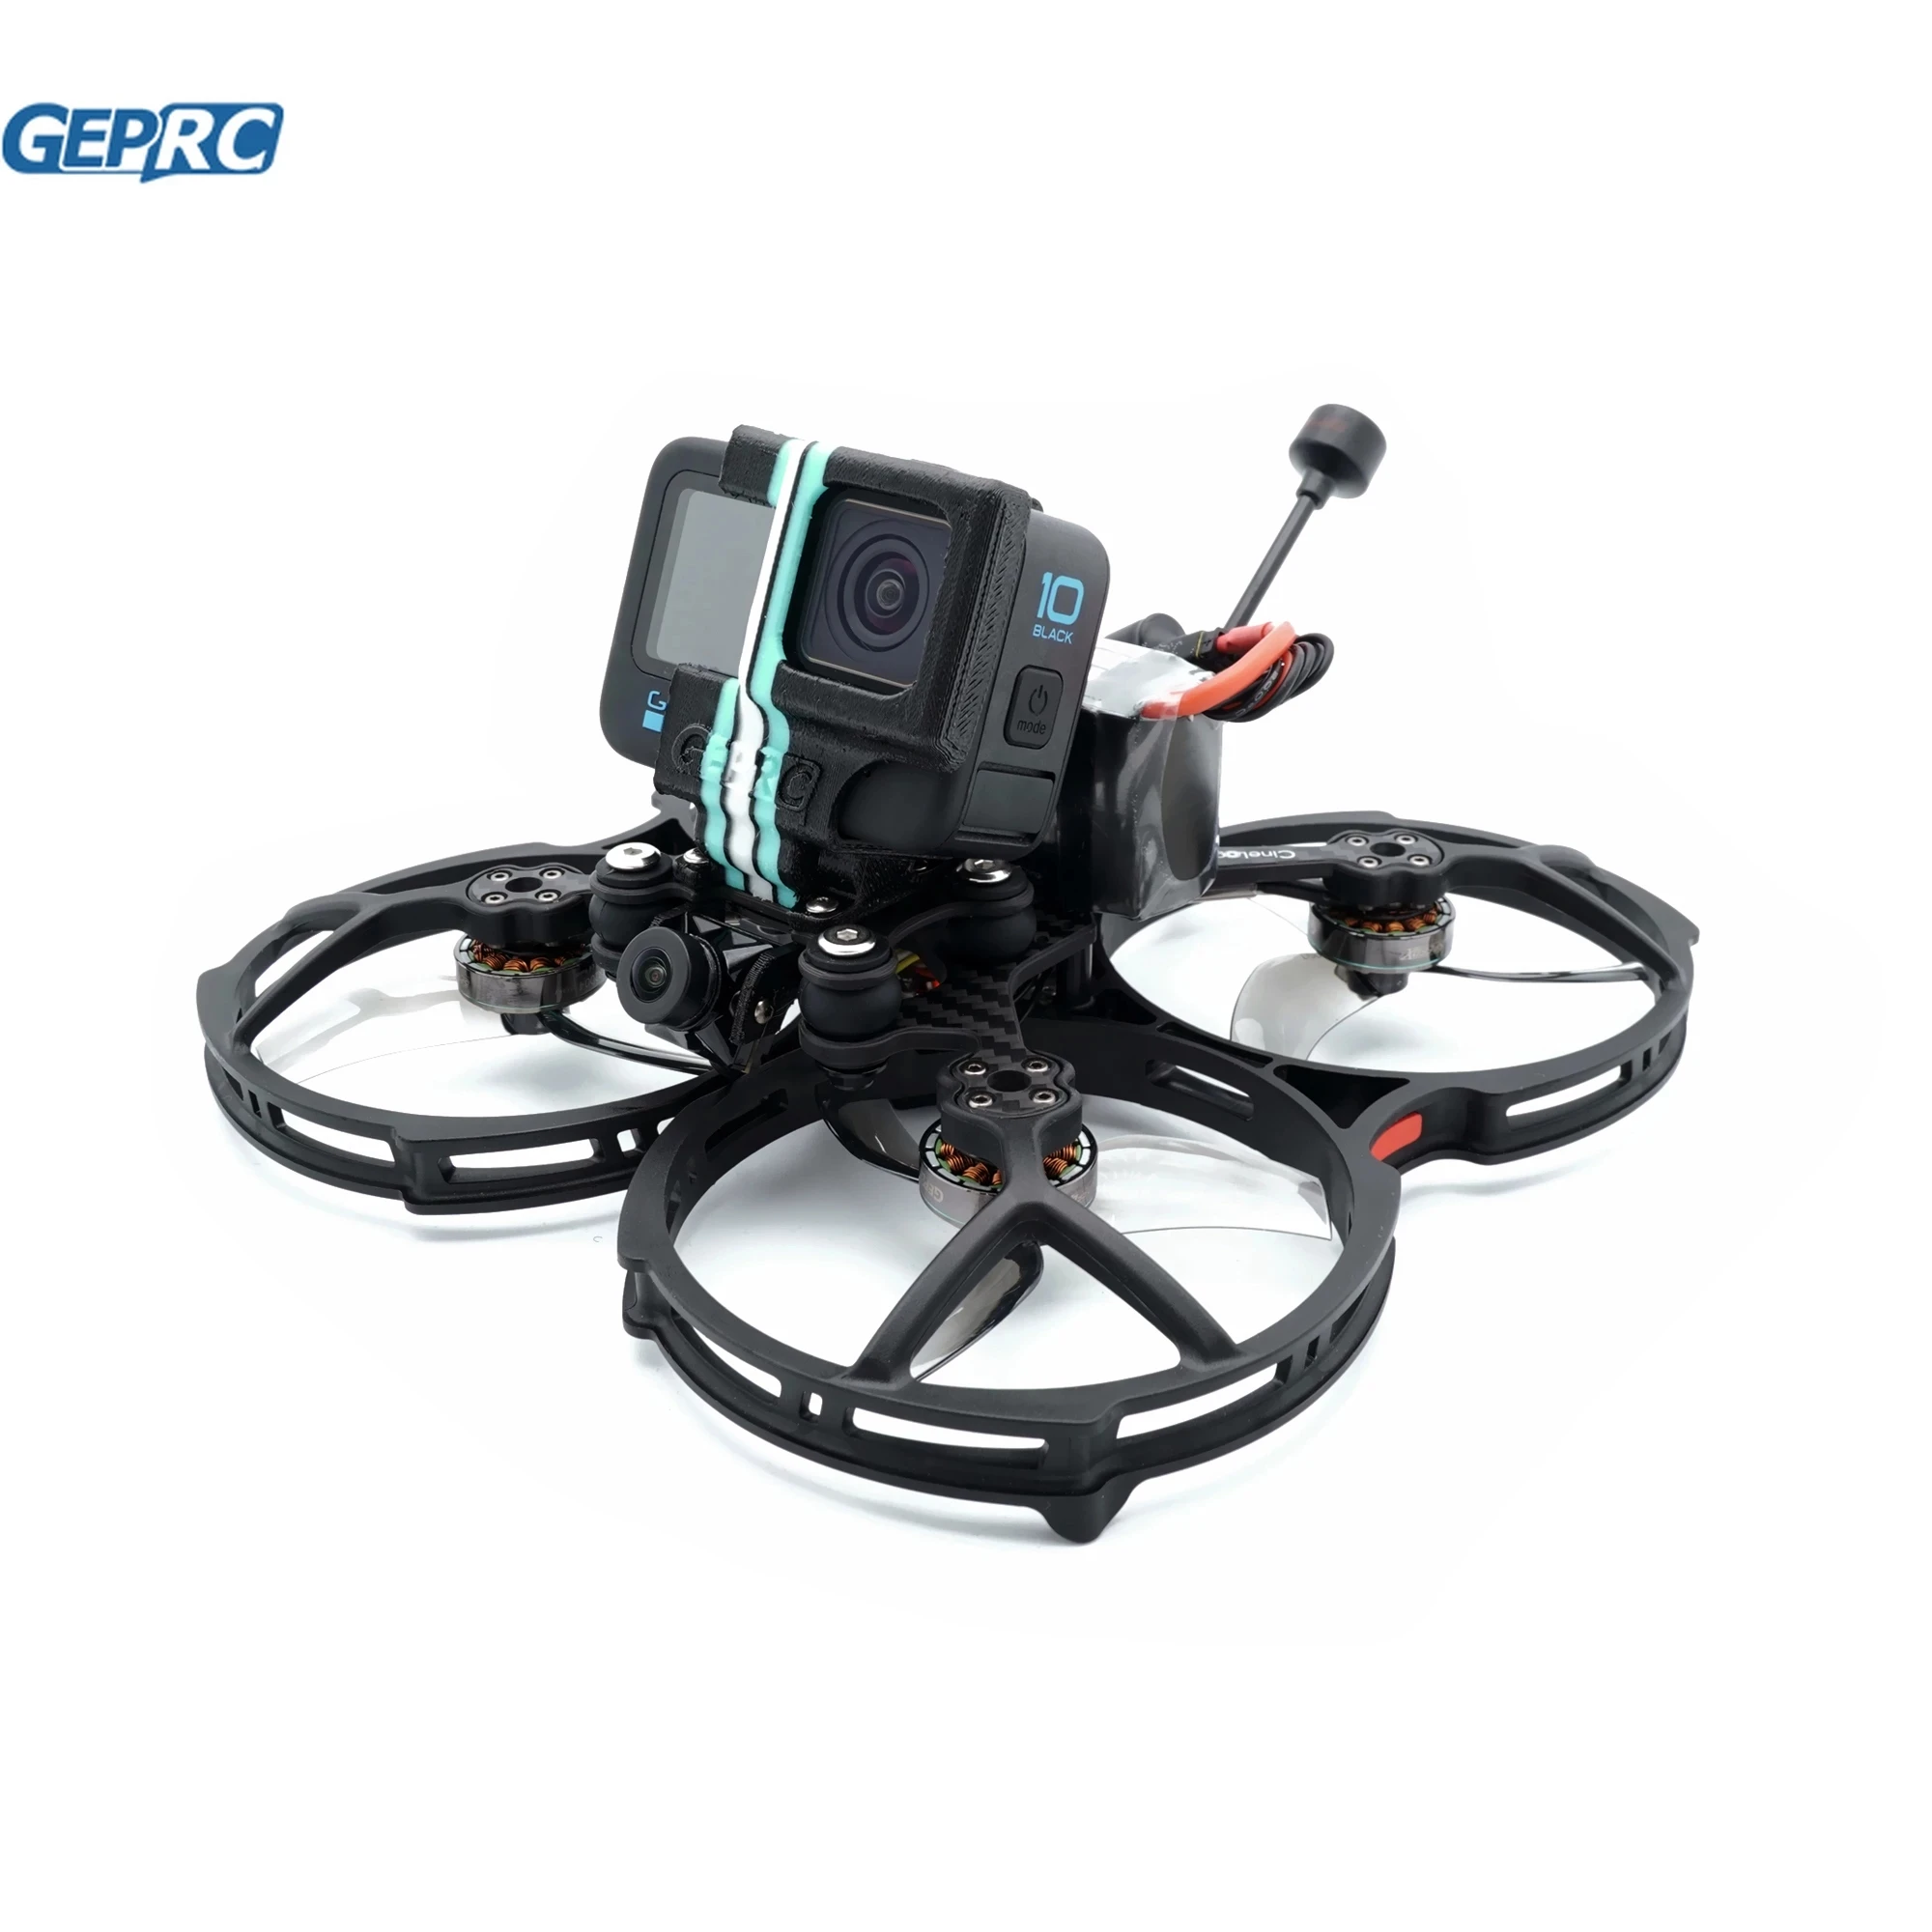 GEPRC CineLog35 HD WITH Vista Nebula Pro System 4S/6S Cinewhoop For RC FPV Quadcopter Freestyle Drone GEP CineLog 35